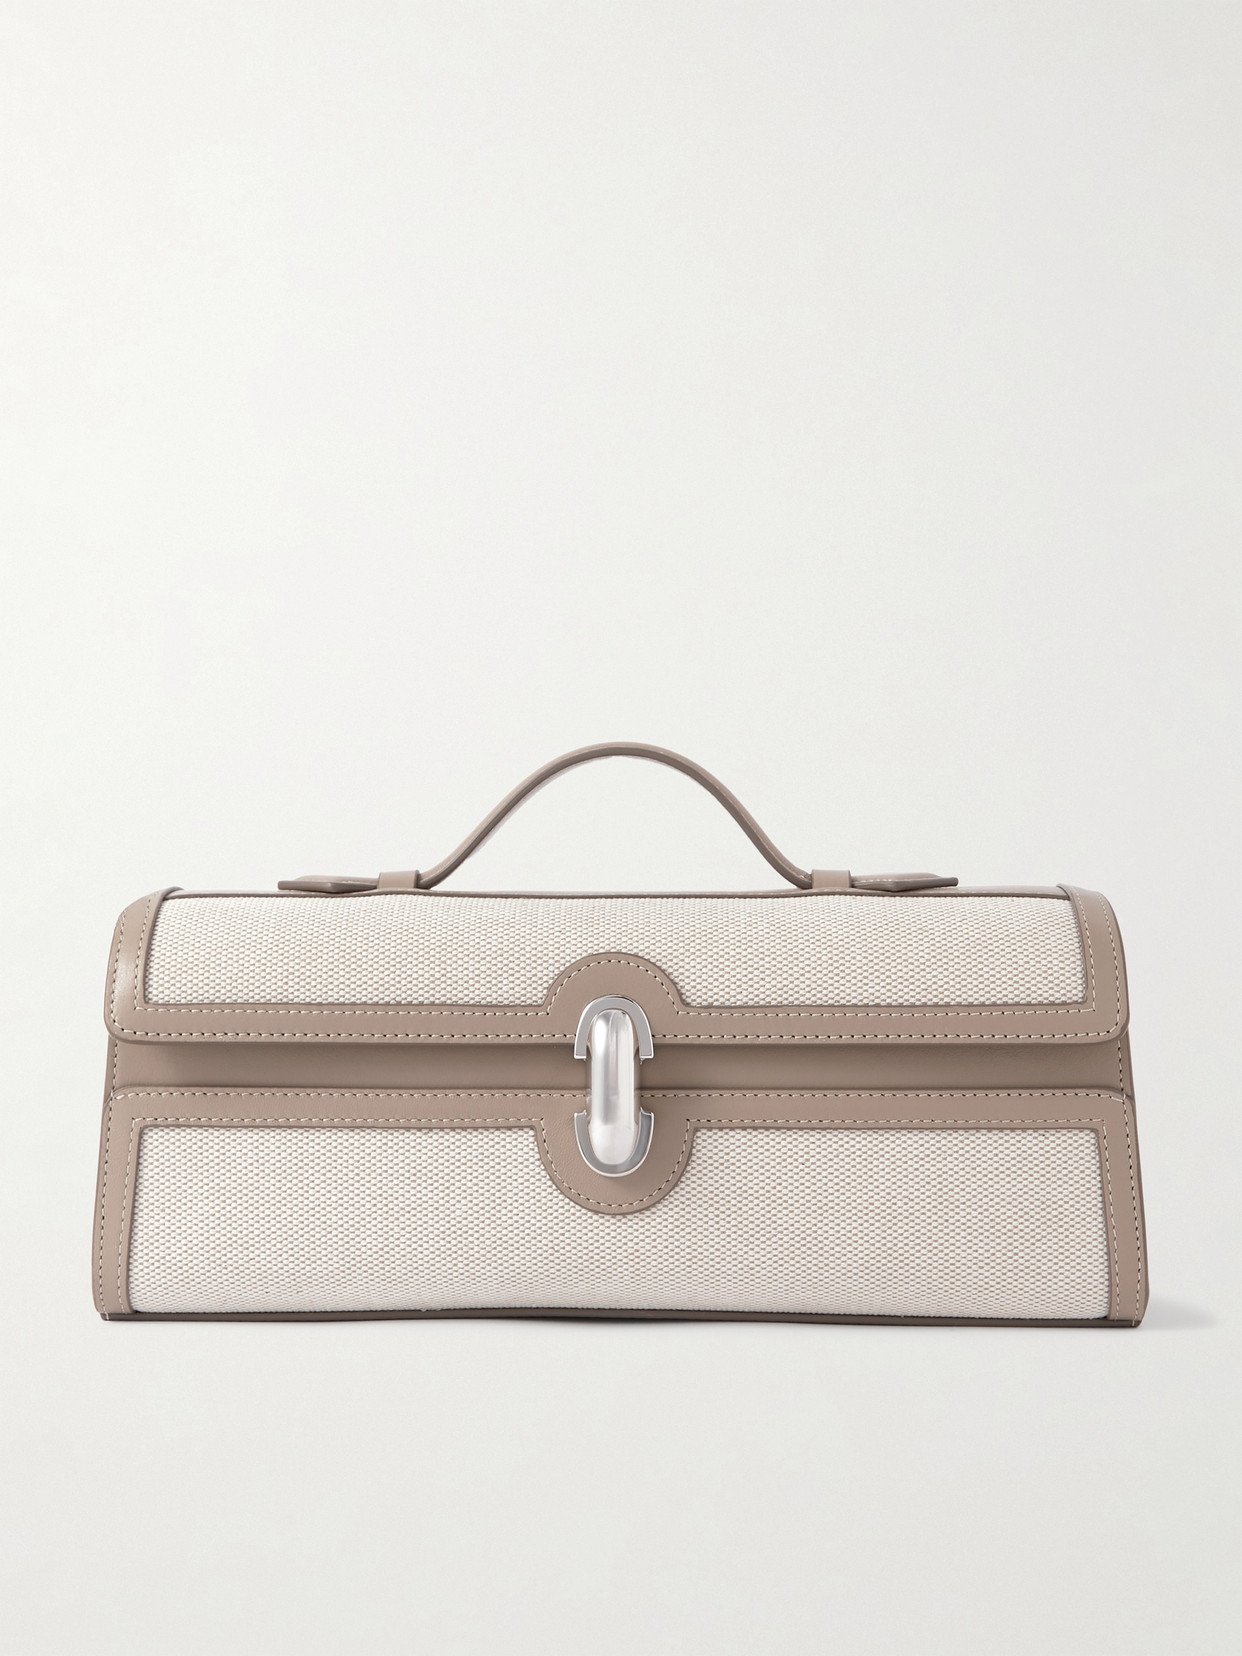 Slim Symmetry Canvas-Trimmed Leather Clutch